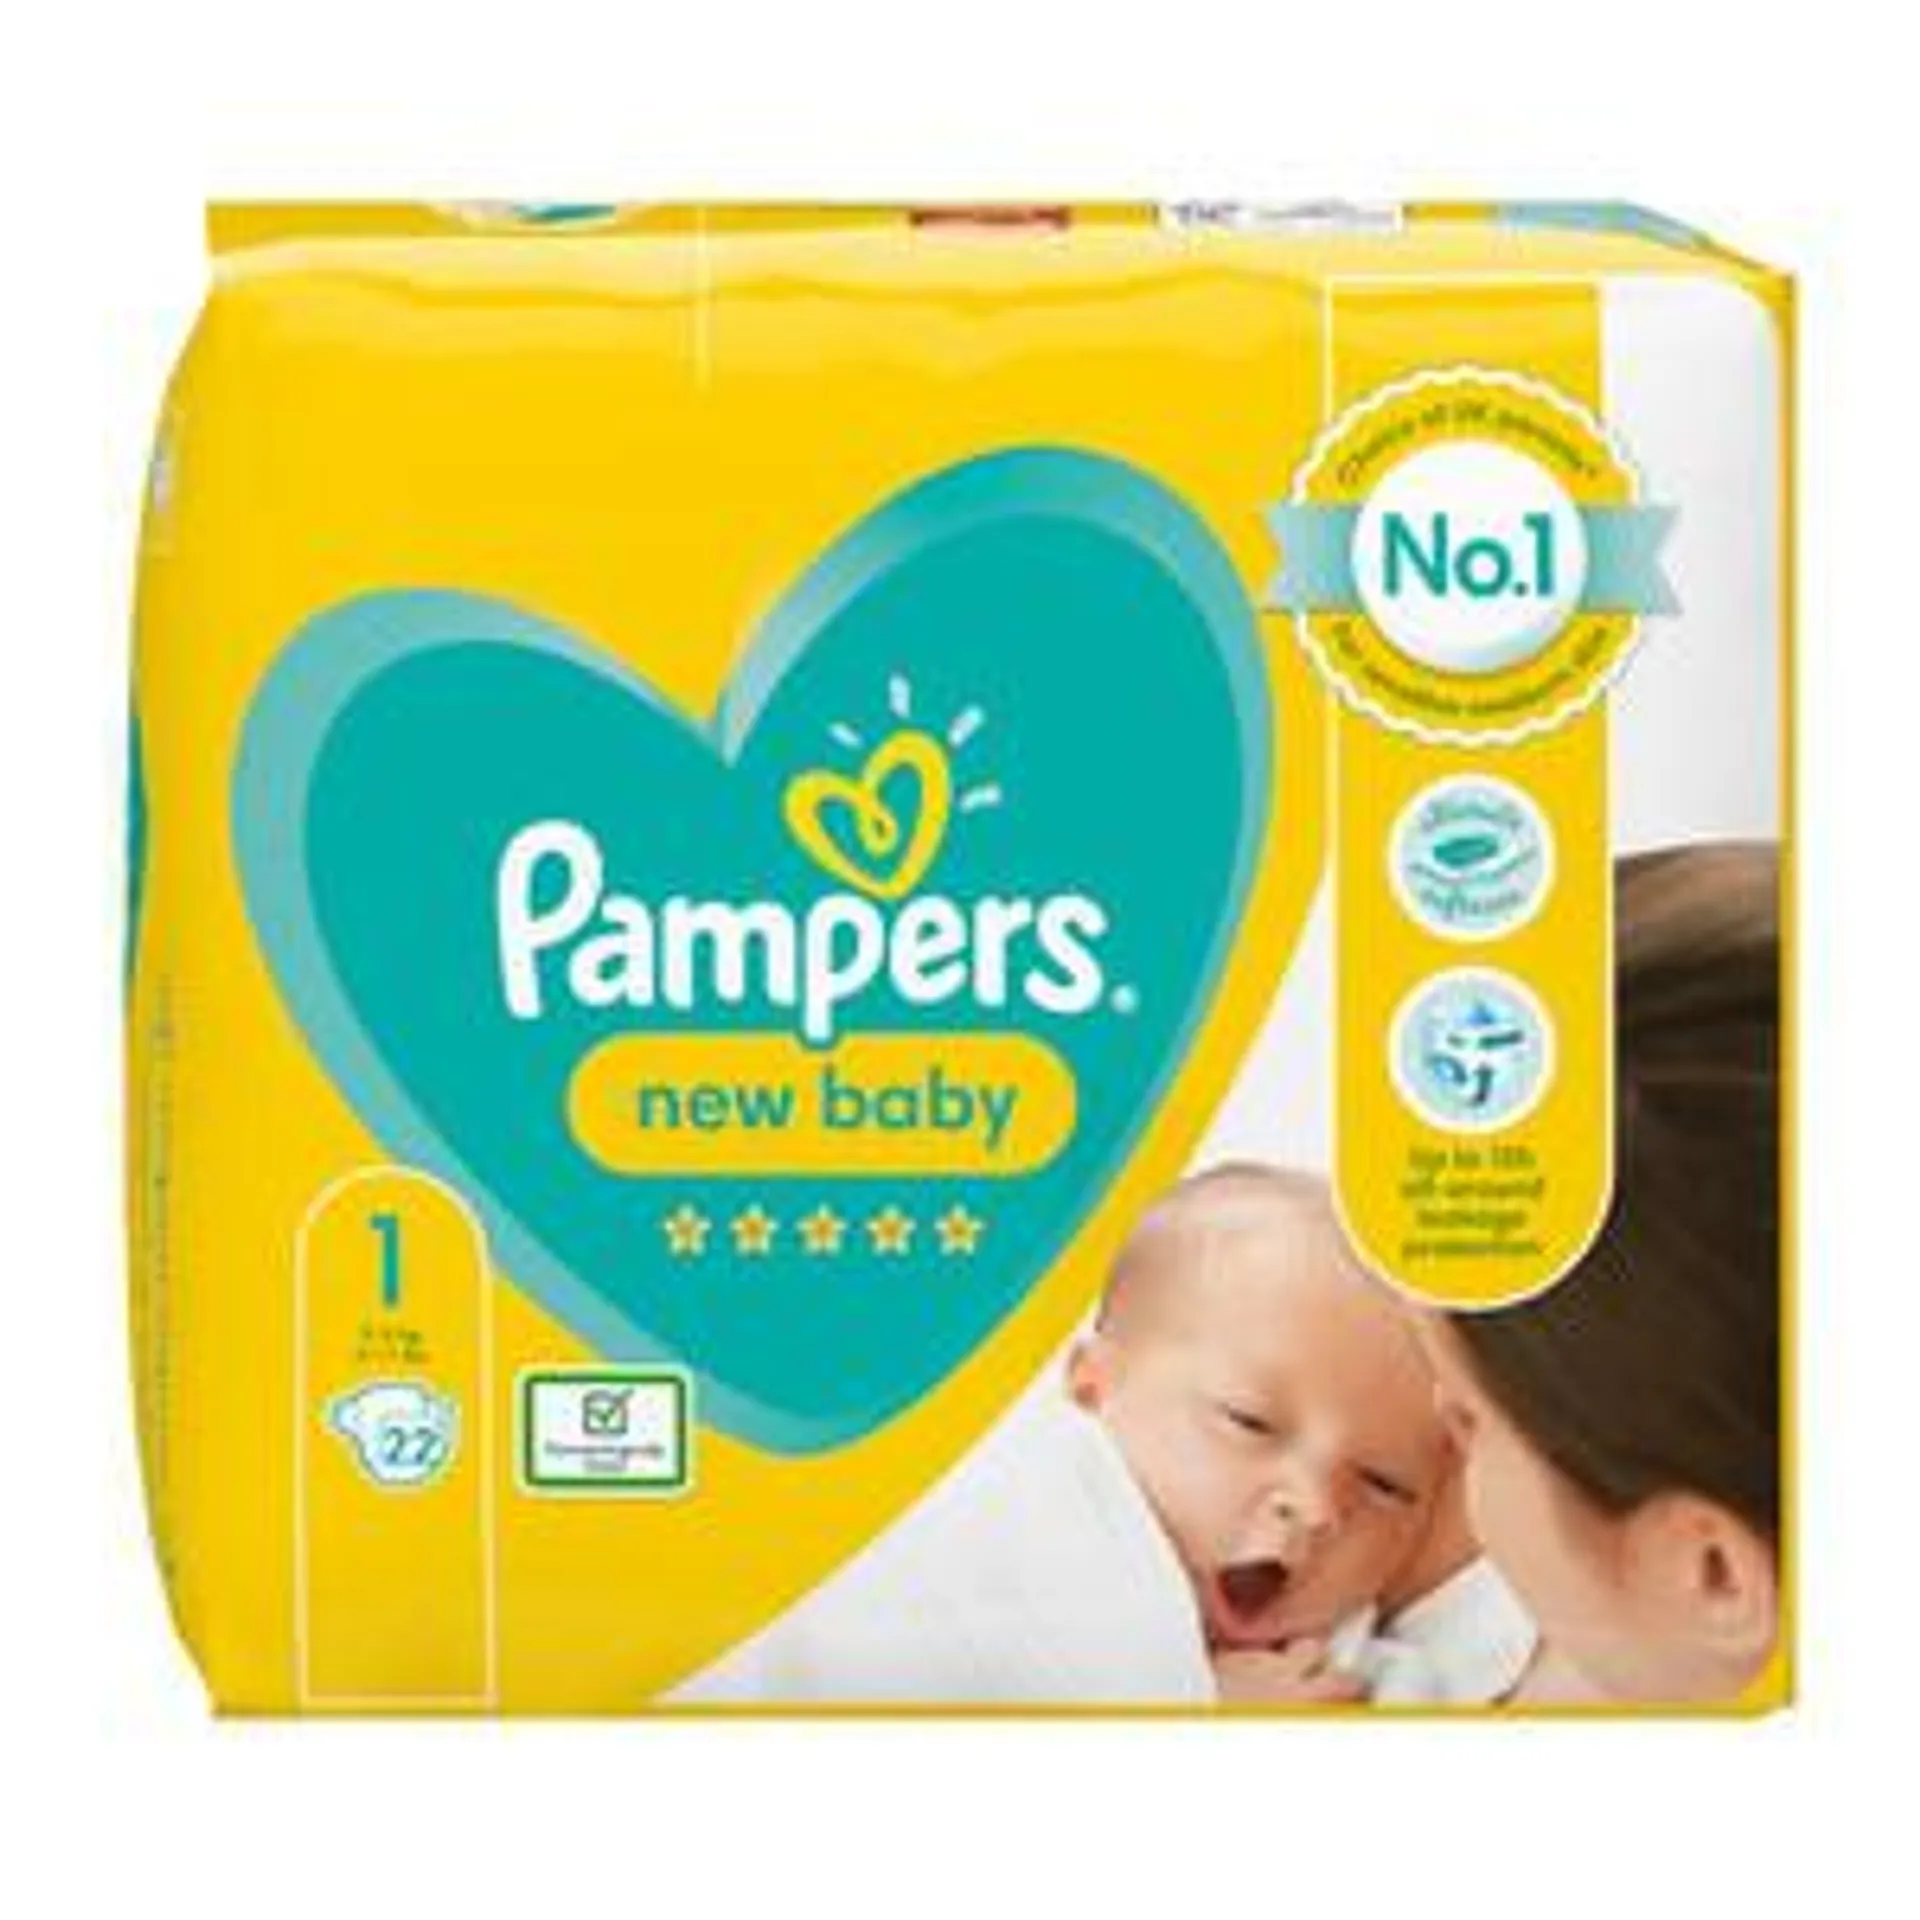 Pampers New Born Size 1 Nappies Carry 22 Pack